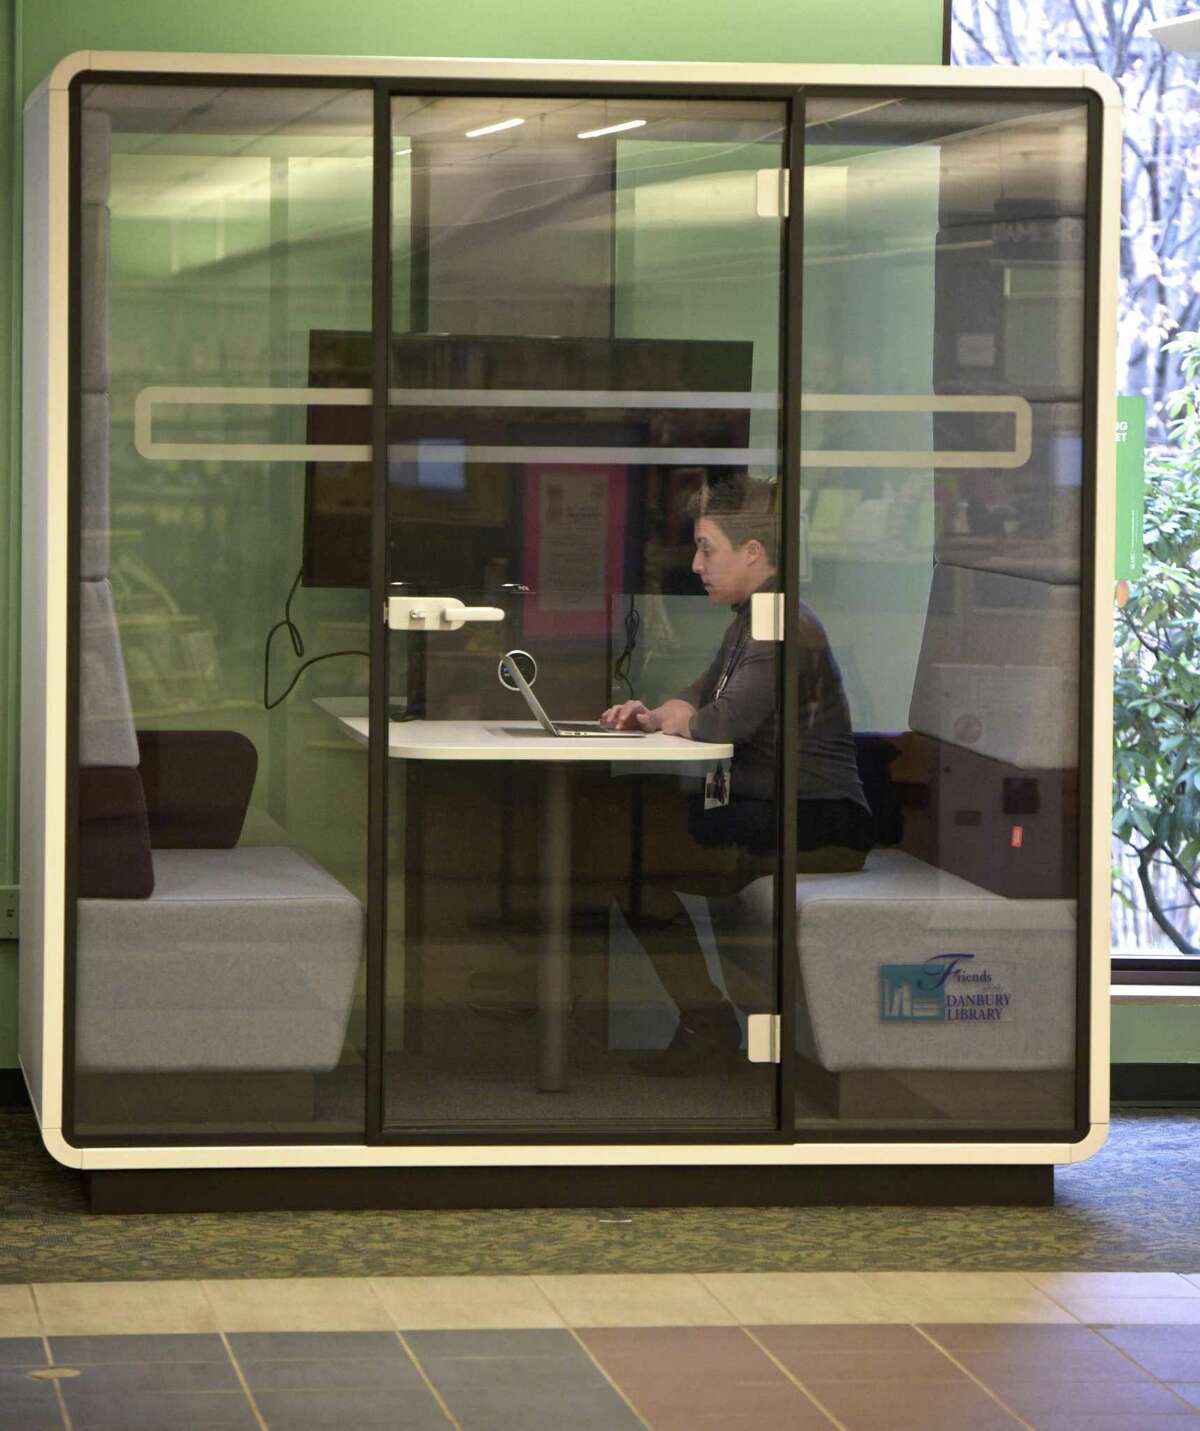 Digital Servies Librarian Amanda Gilbertie demonstrates the new meeting pod at the Danbury Public Library.